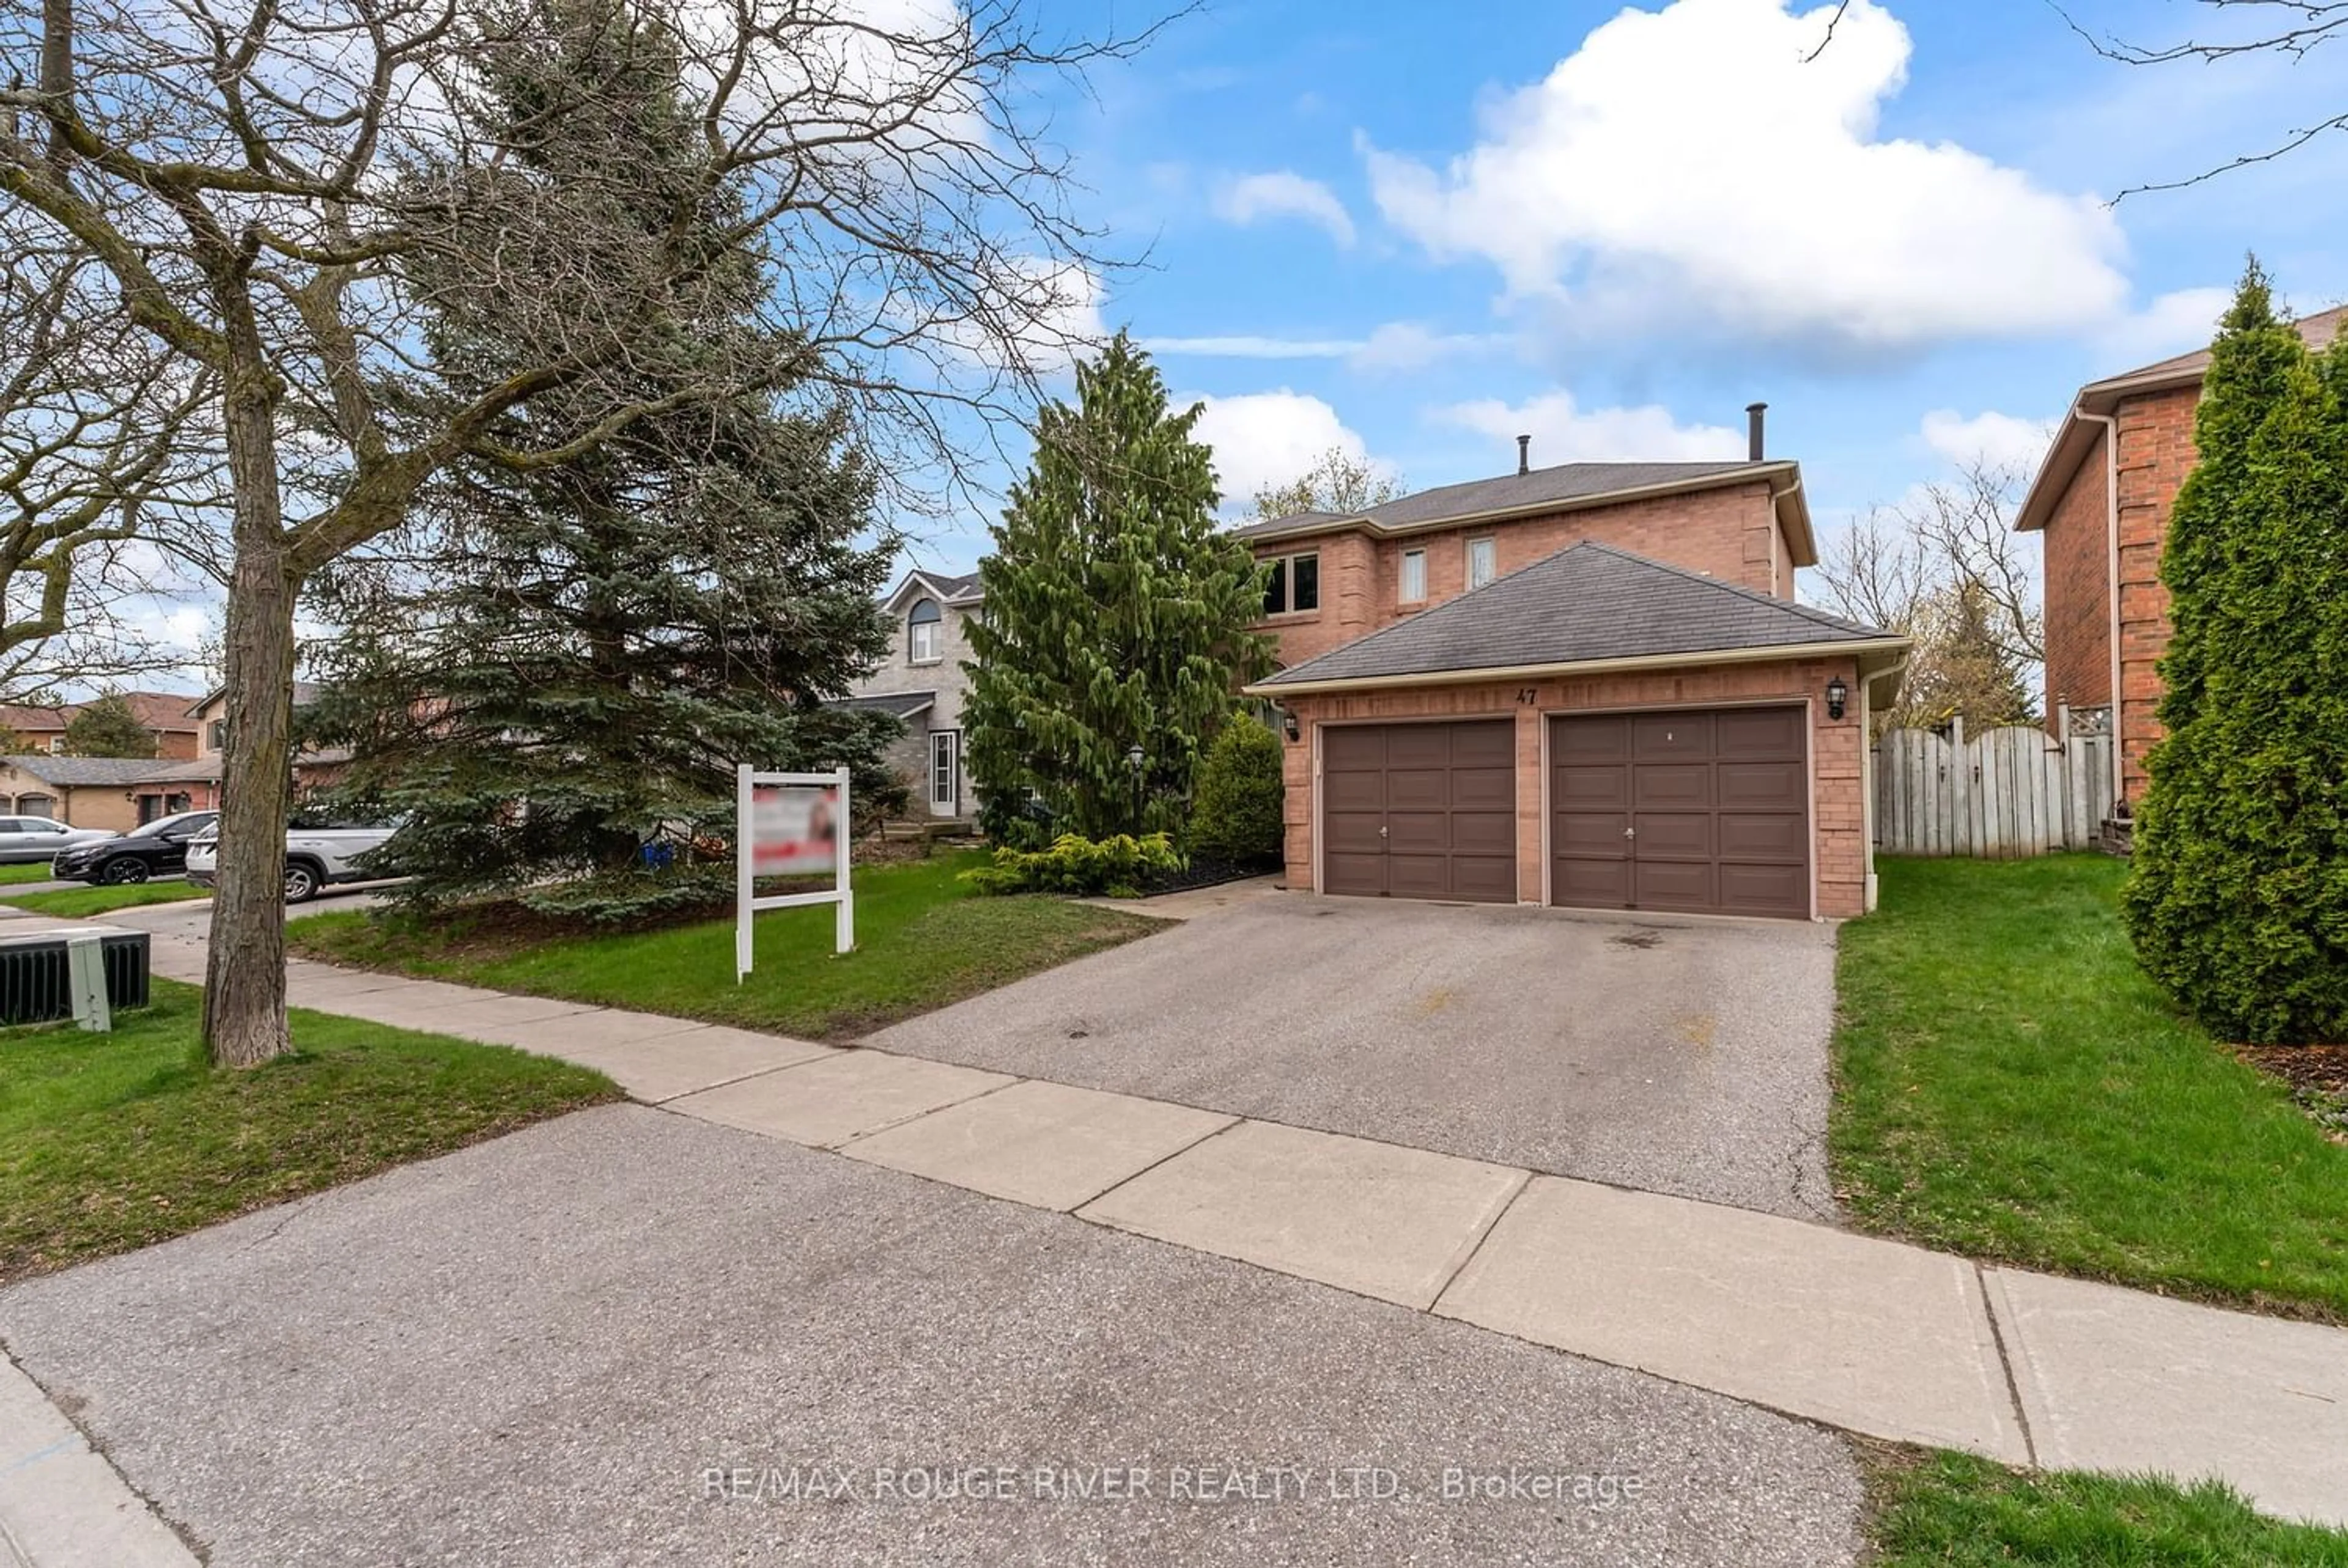 Frontside or backside of a home for 47 Willowbrook Dr, Whitby Ontario L1R 1S6